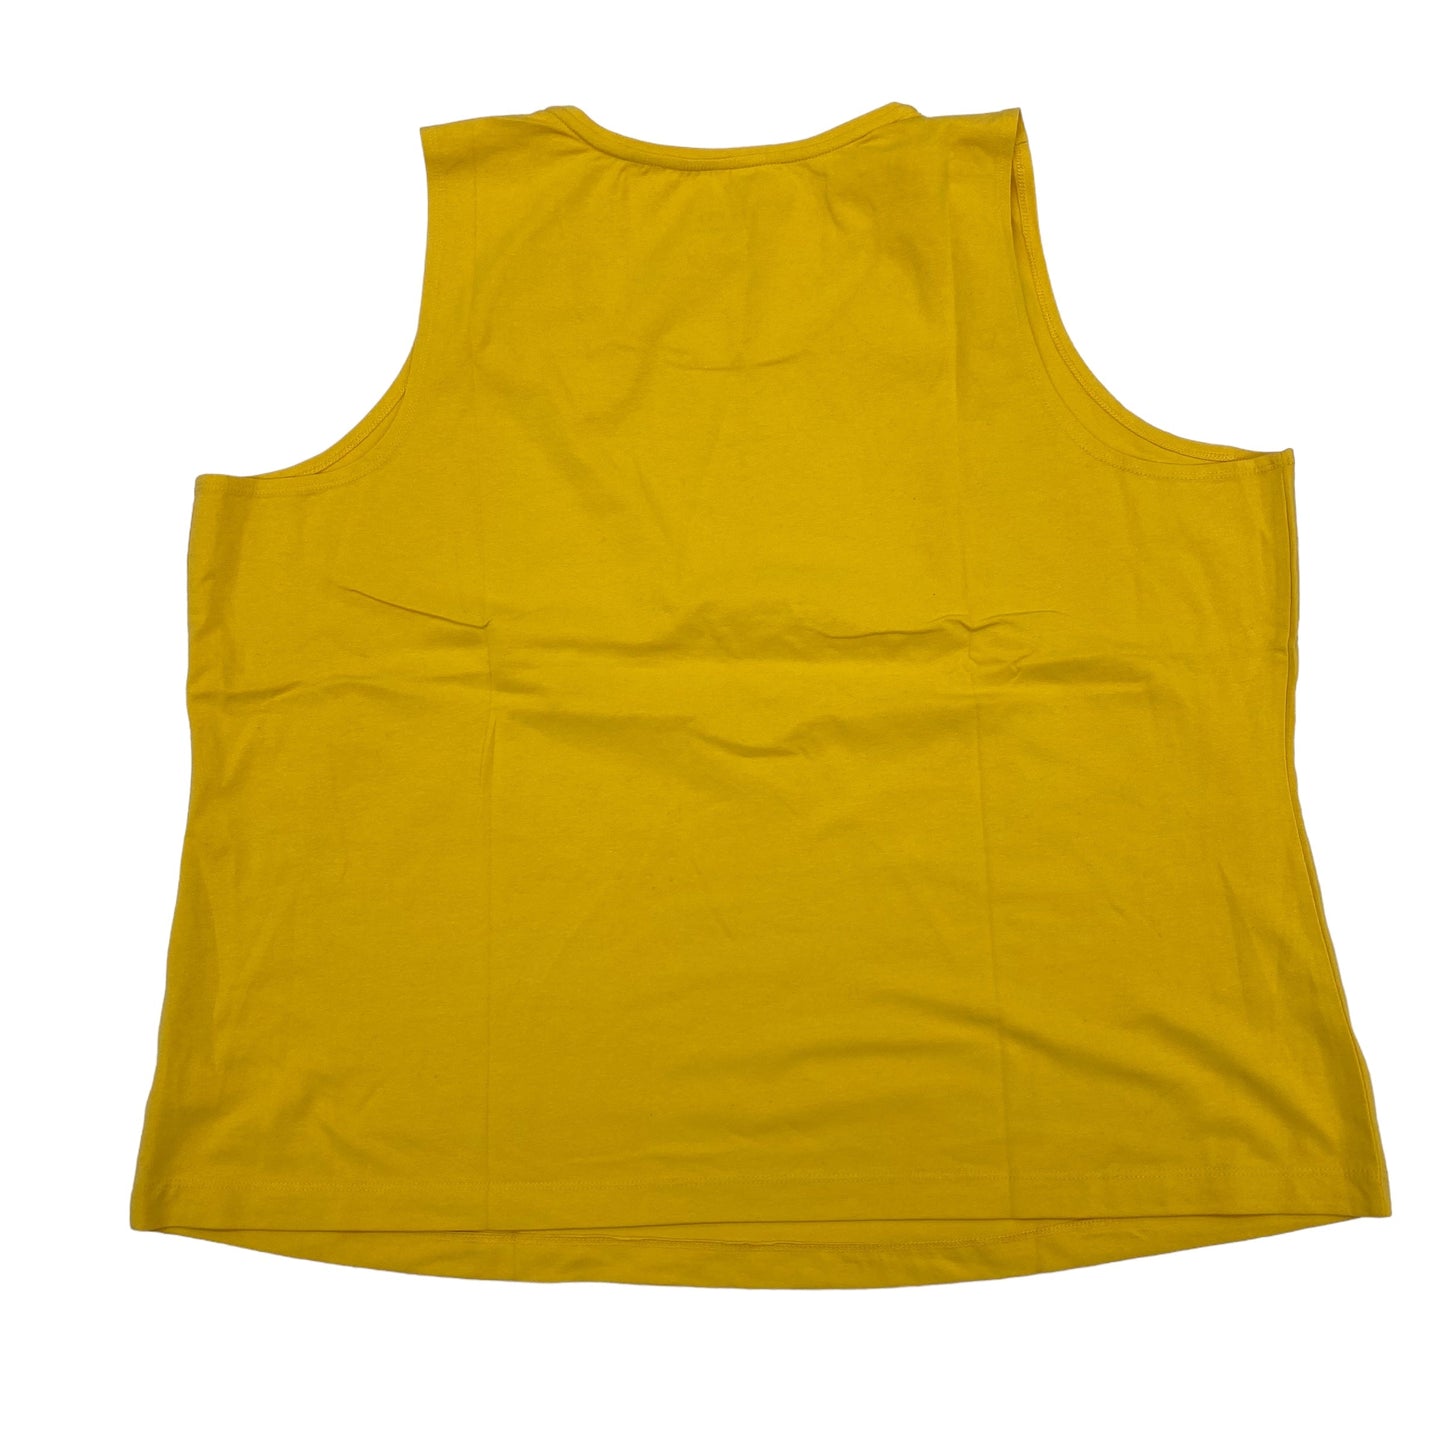 Yellow Tank Top Denim And Company, Size 2x